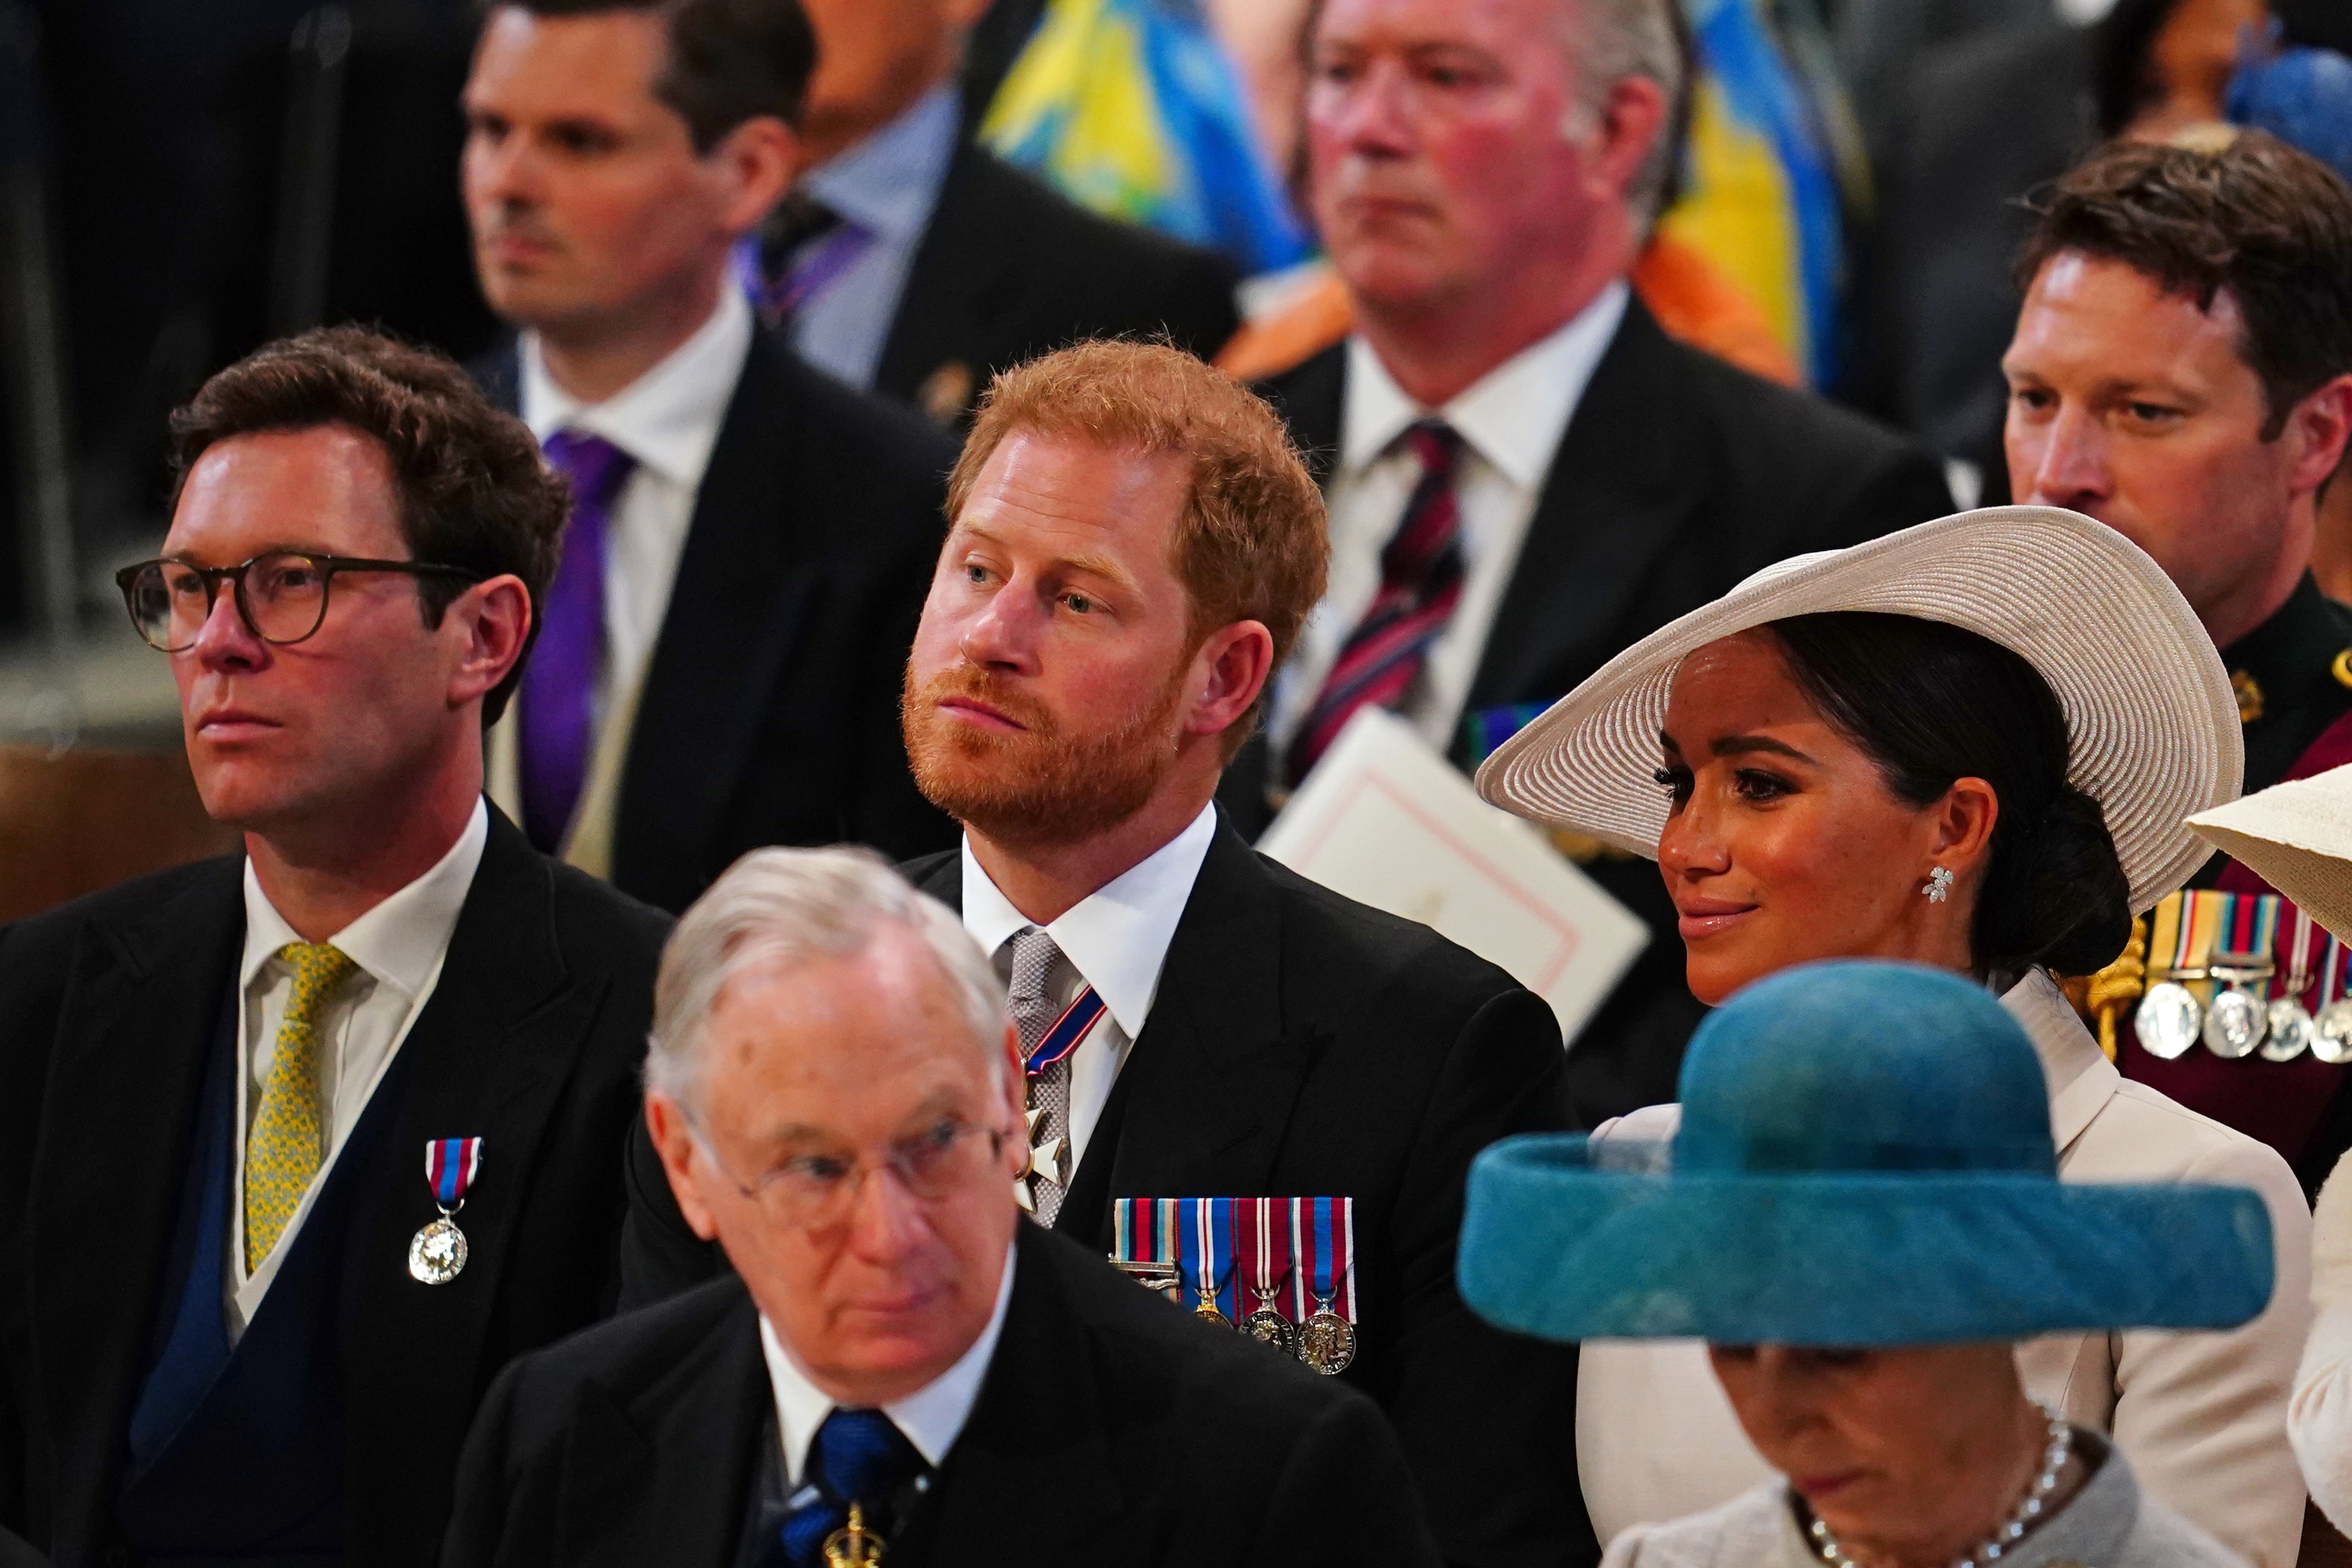 Jack Brooksbank and the Duke and Duchess of Sussex during the National Service of Thanksgiving in London at the Queen's Platinum Jubilee celebrations on June 3, 2022. | Source: Getty Images